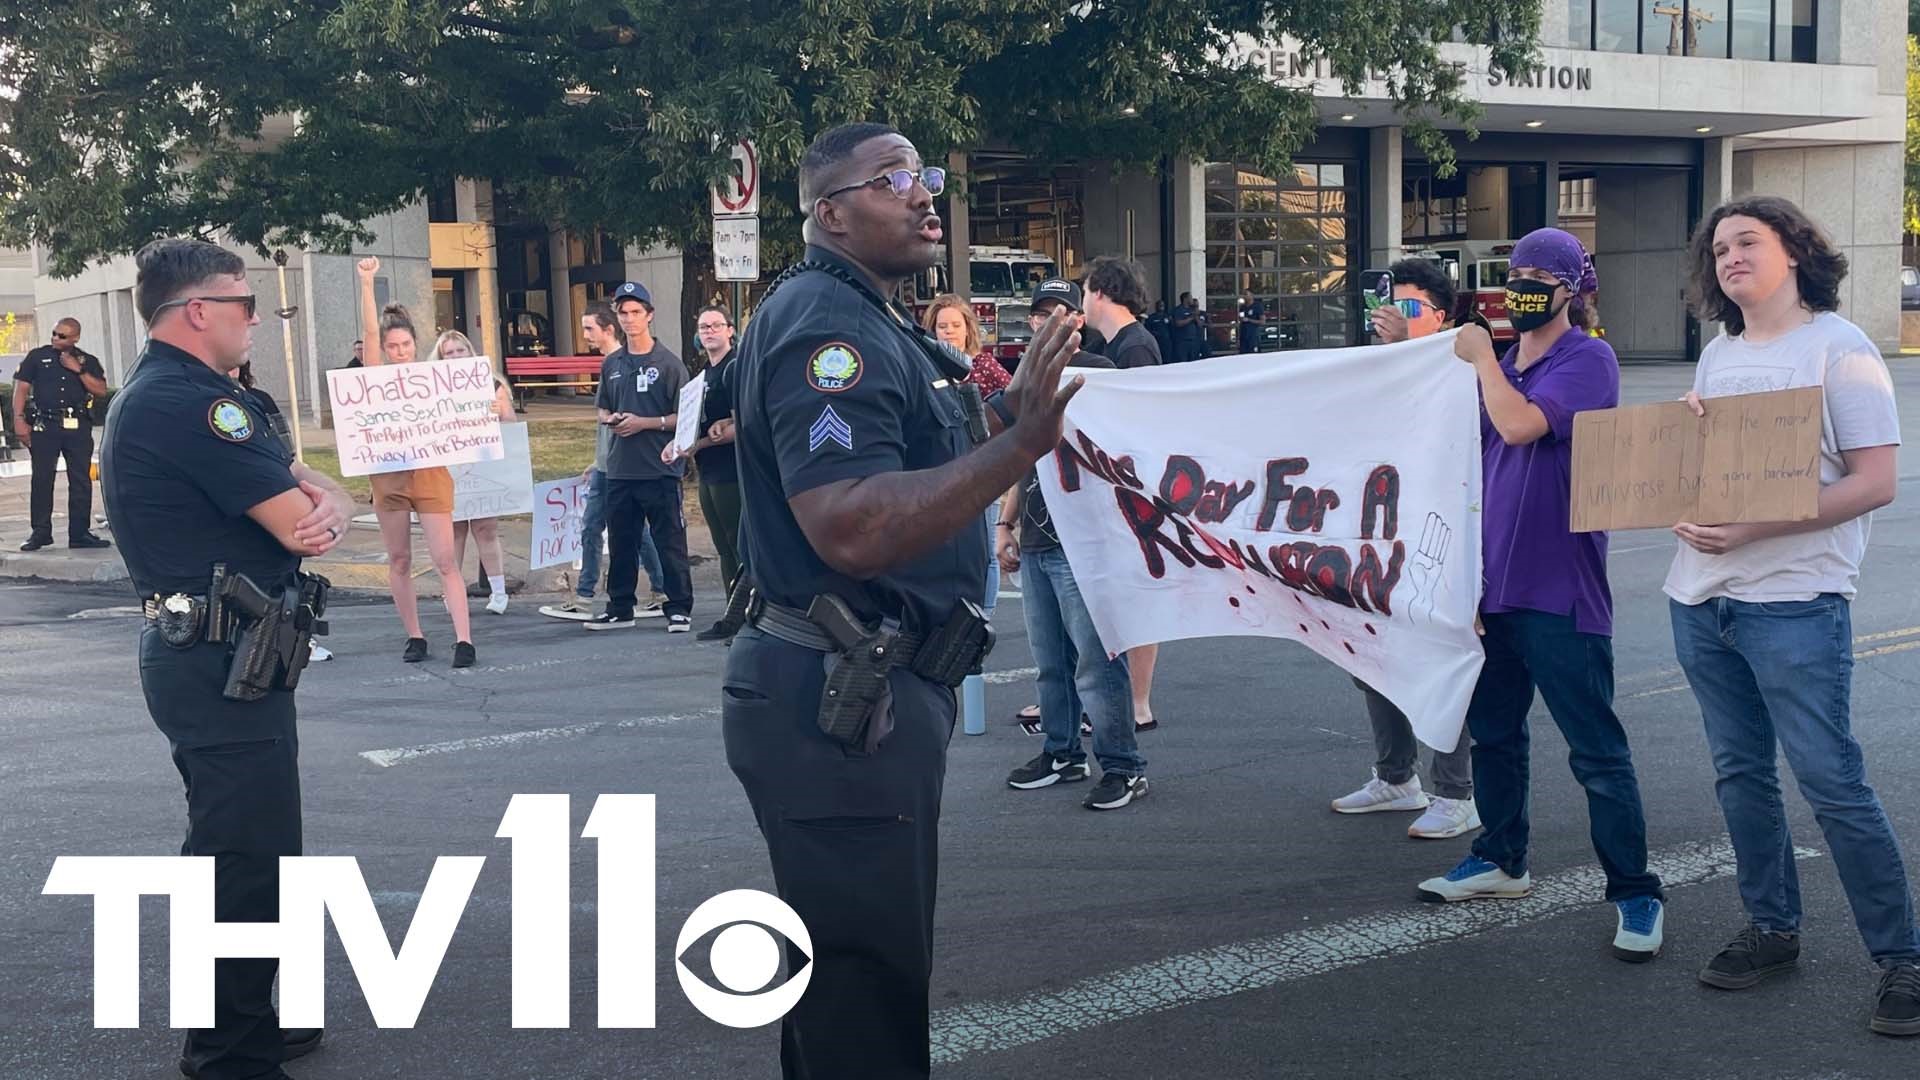 Little Rock protestors briefly shut down 7th and Chester Street on Wednesday as demonstrators gathered in response to the overturning of Roe v. Wade.